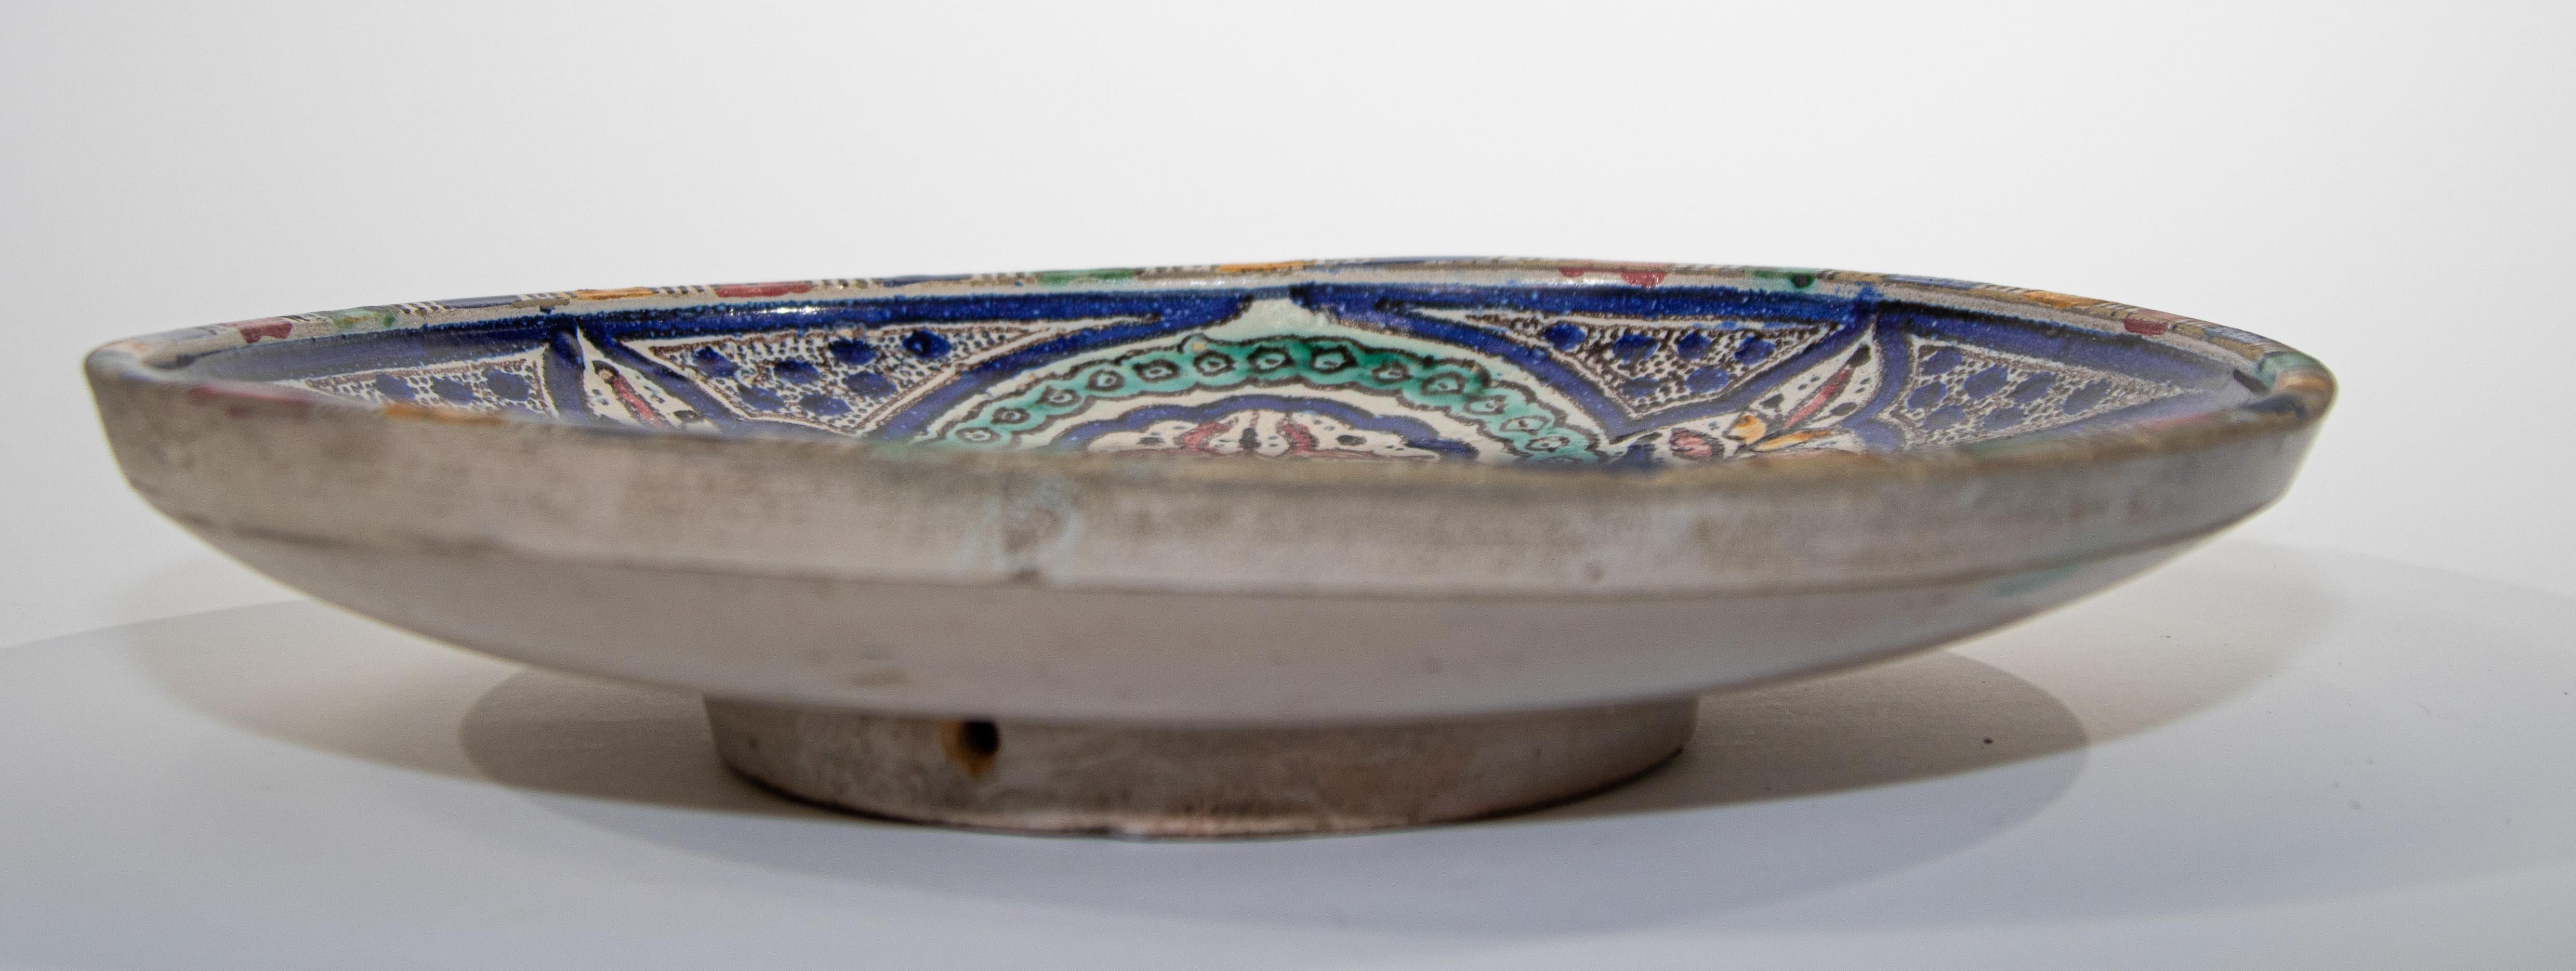 Antique Moroccan Ceramic Bowl from Fez 1920's For Sale 11